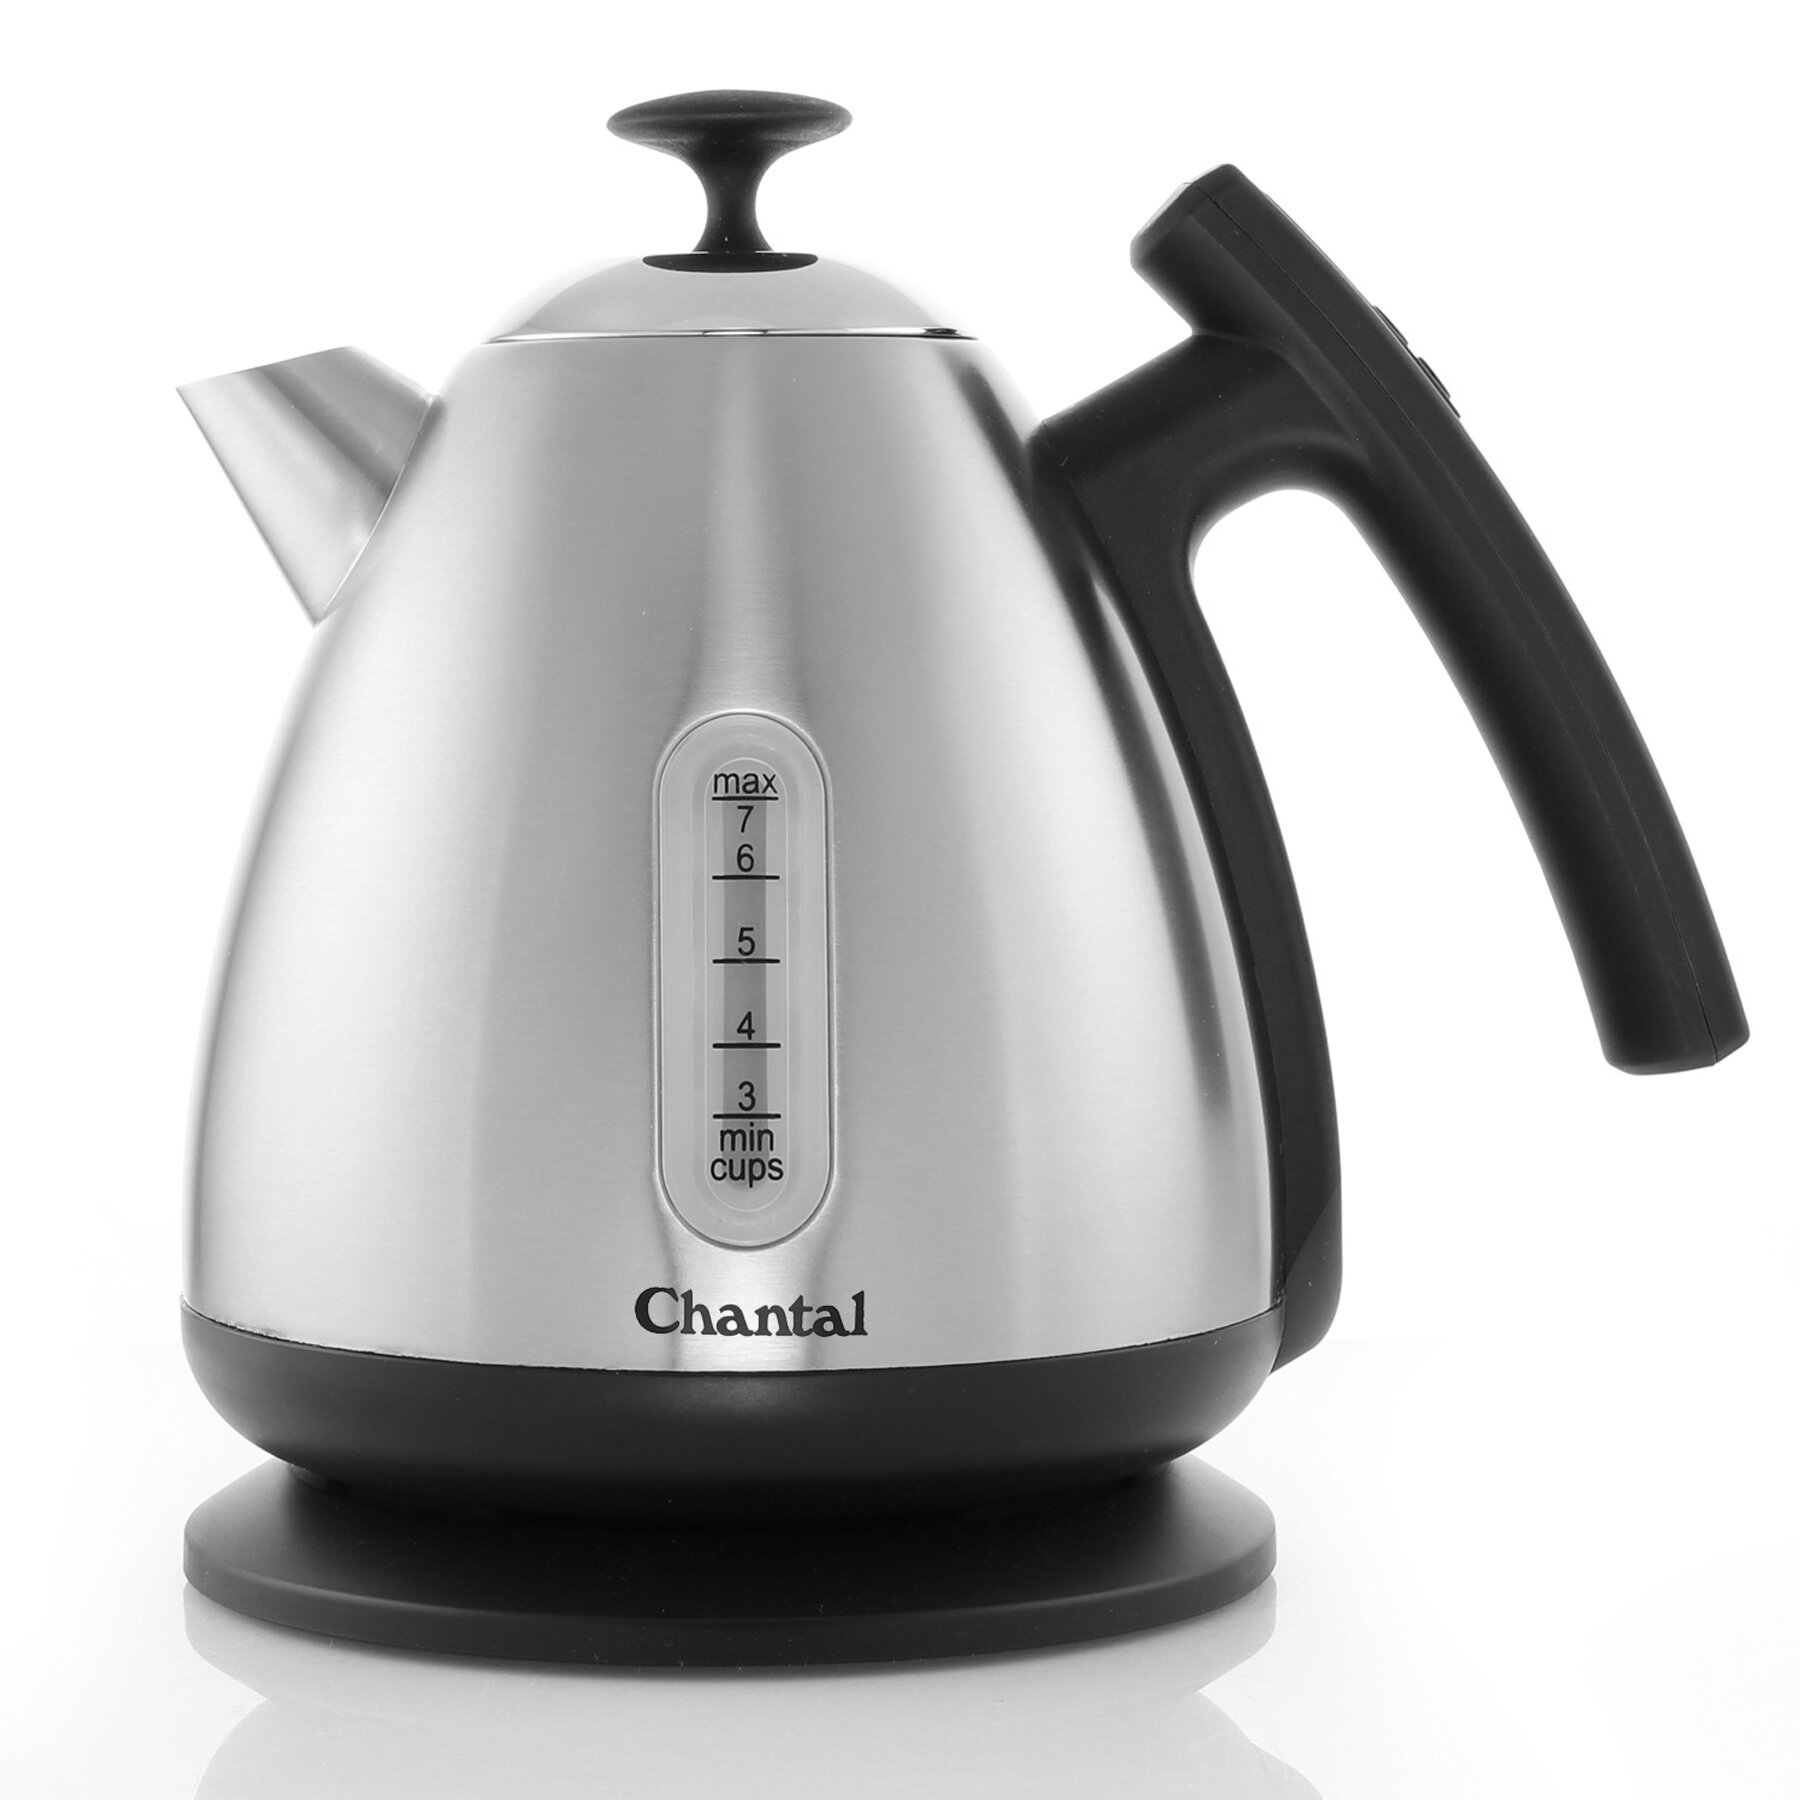 SEGUIRA 1.5 Liter Electric Hot Water Kettle With Automatic Shut